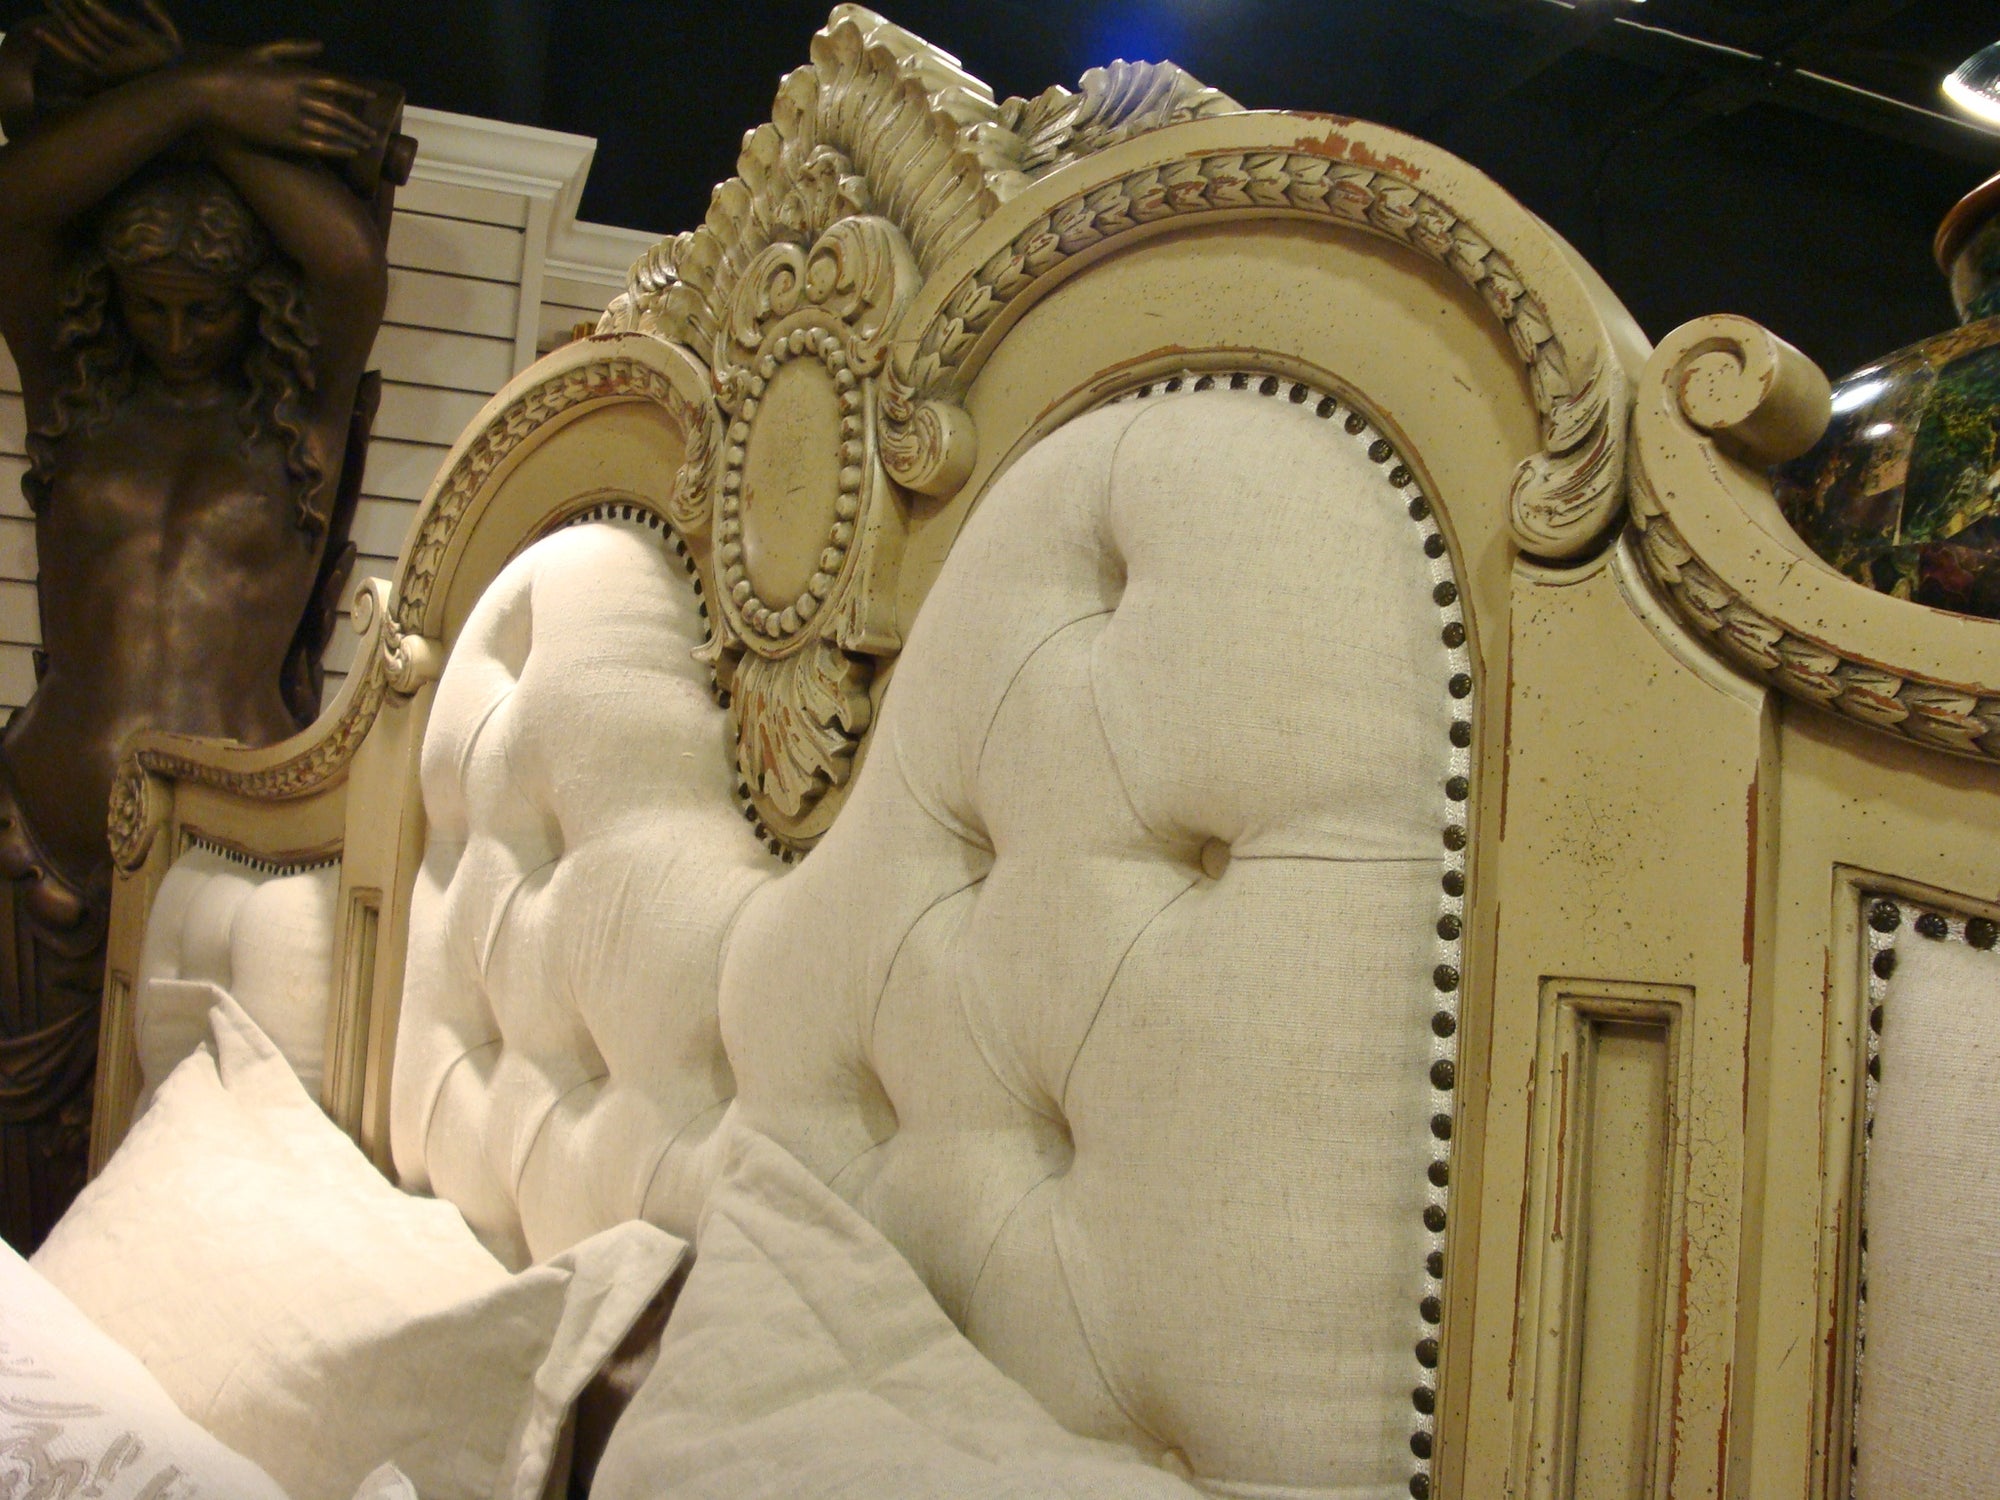 Massive Mansion King Bed Parchment Finish - Furniture on Main